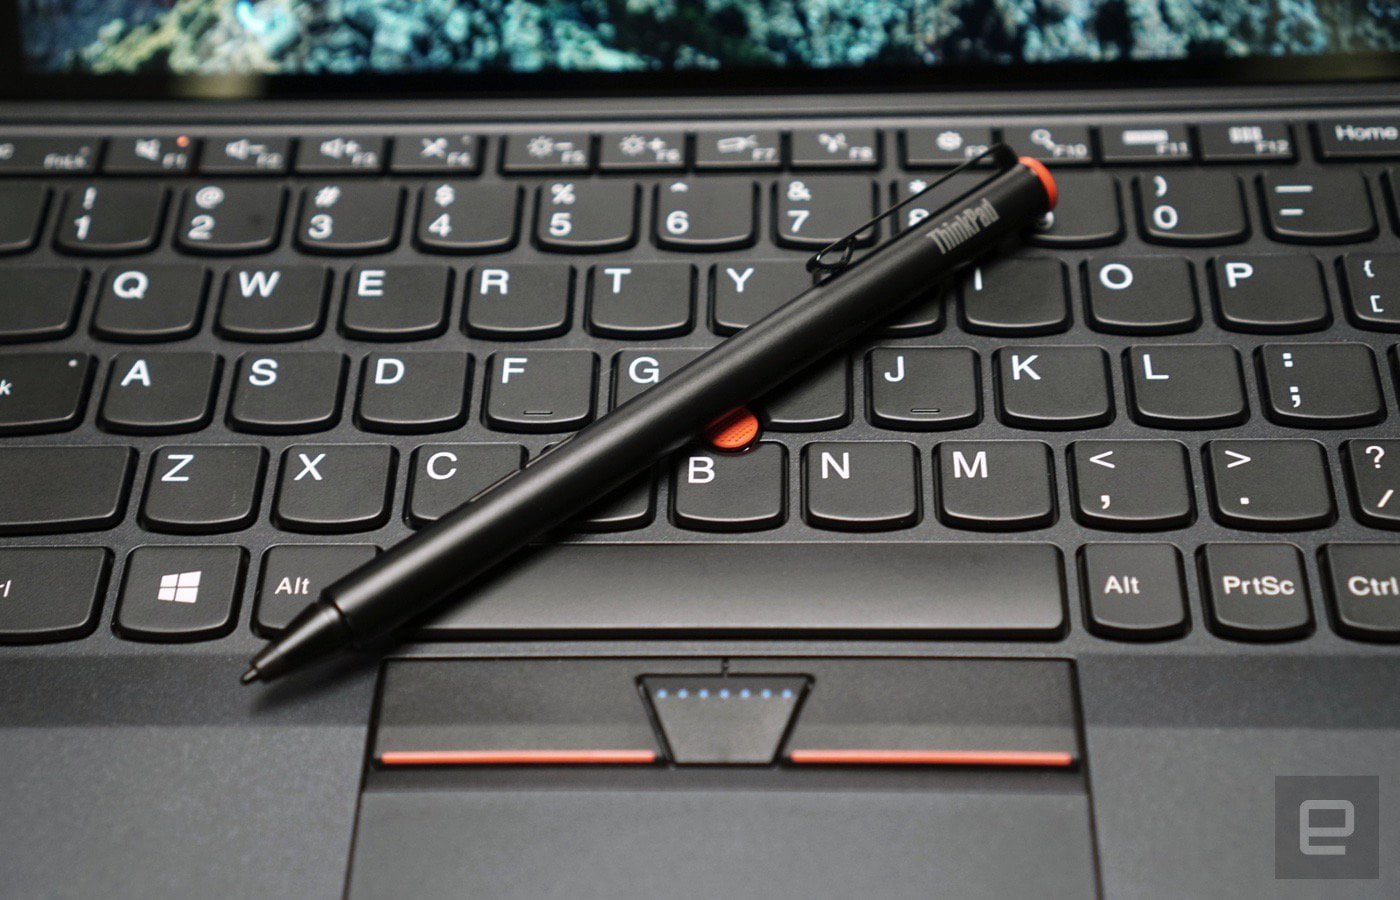 The ThinkPad X1 tablet is sort of a floor with a enterprise twist